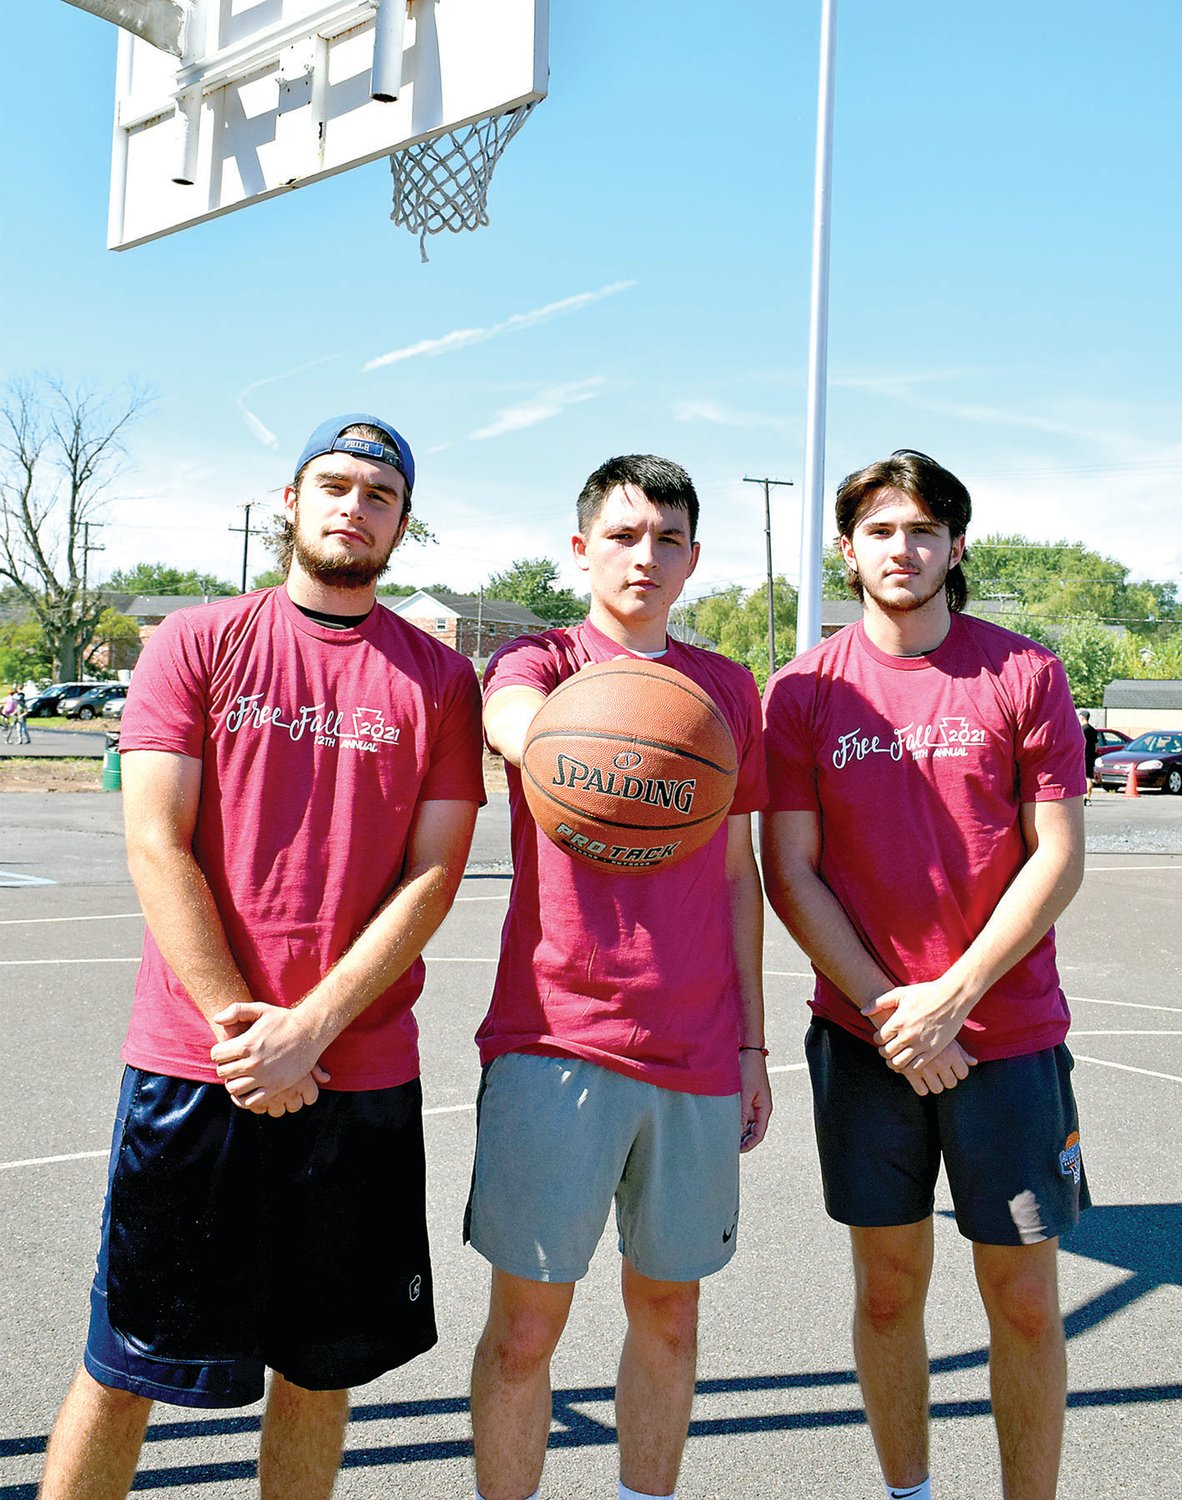 Jimmy Walterstradt, Joel Welliver of Quakertown and Jacob Schuebel of Coopersburg were prepared for the Basketball Competition.